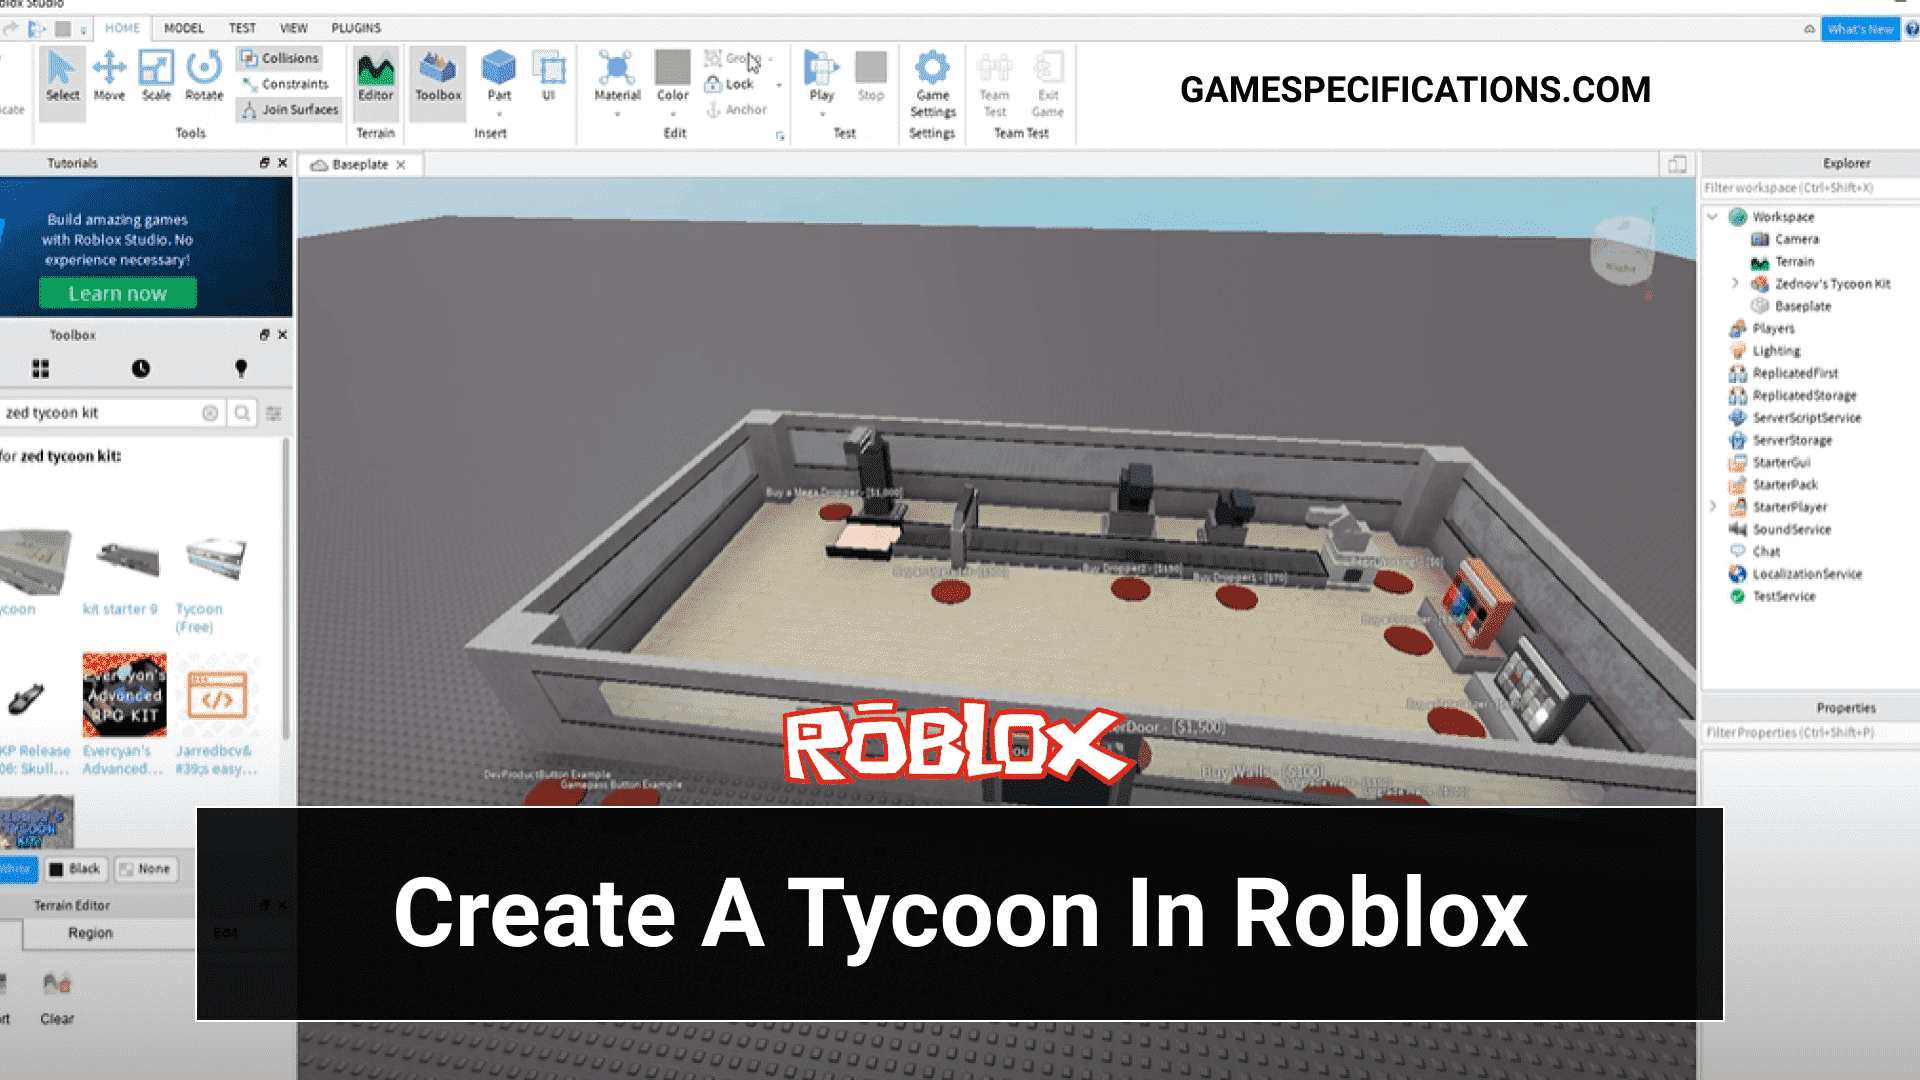 A Complete Guide On How To Make A Tycoon On Roblox Game Specifications - how to make a tycoon in roblox studio 2020